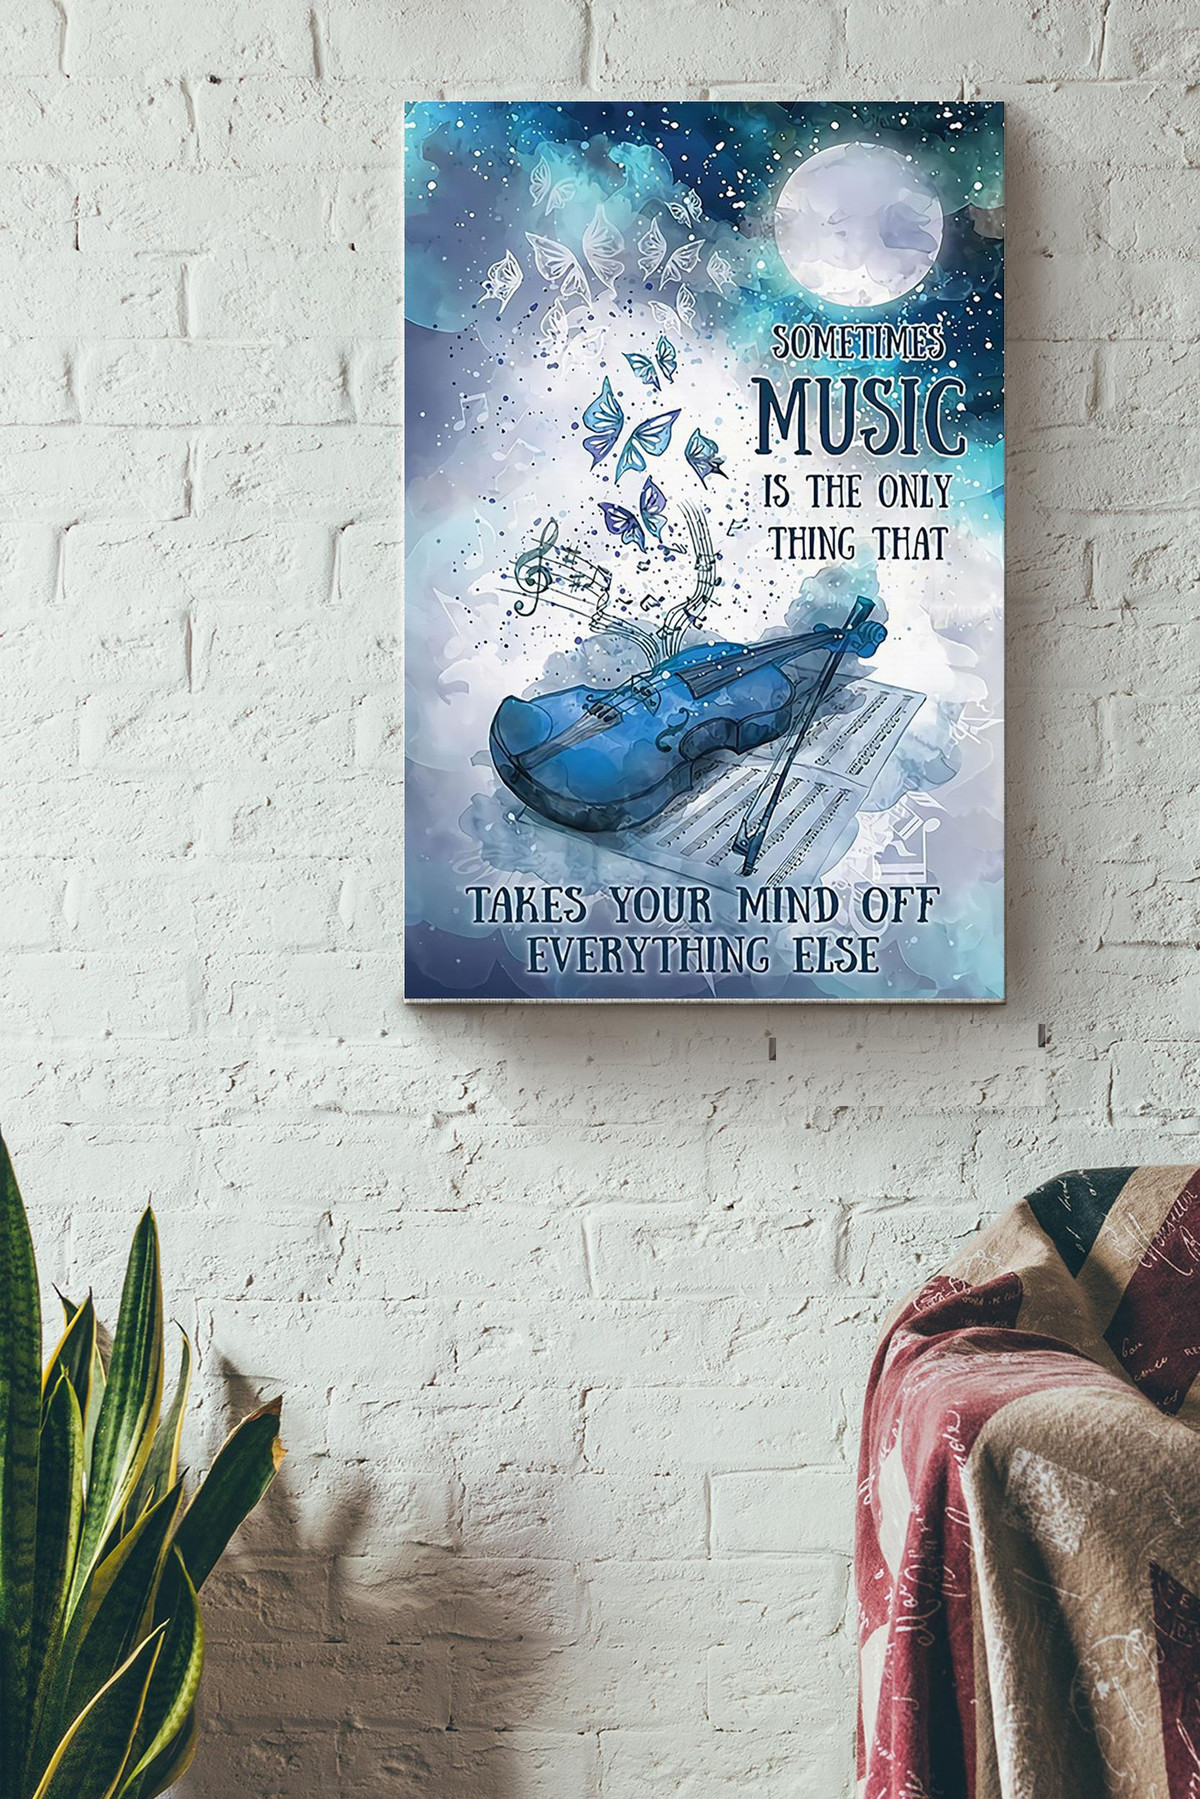 Sometimes Music Is The Only Thing That Takes Your Mind Off Everything Else Violin Canvas Painting Ideas, Canvas Hanging Prints, Gift Idea Framed Prints, Canvas Paintings Wrapped Canvas 8x10